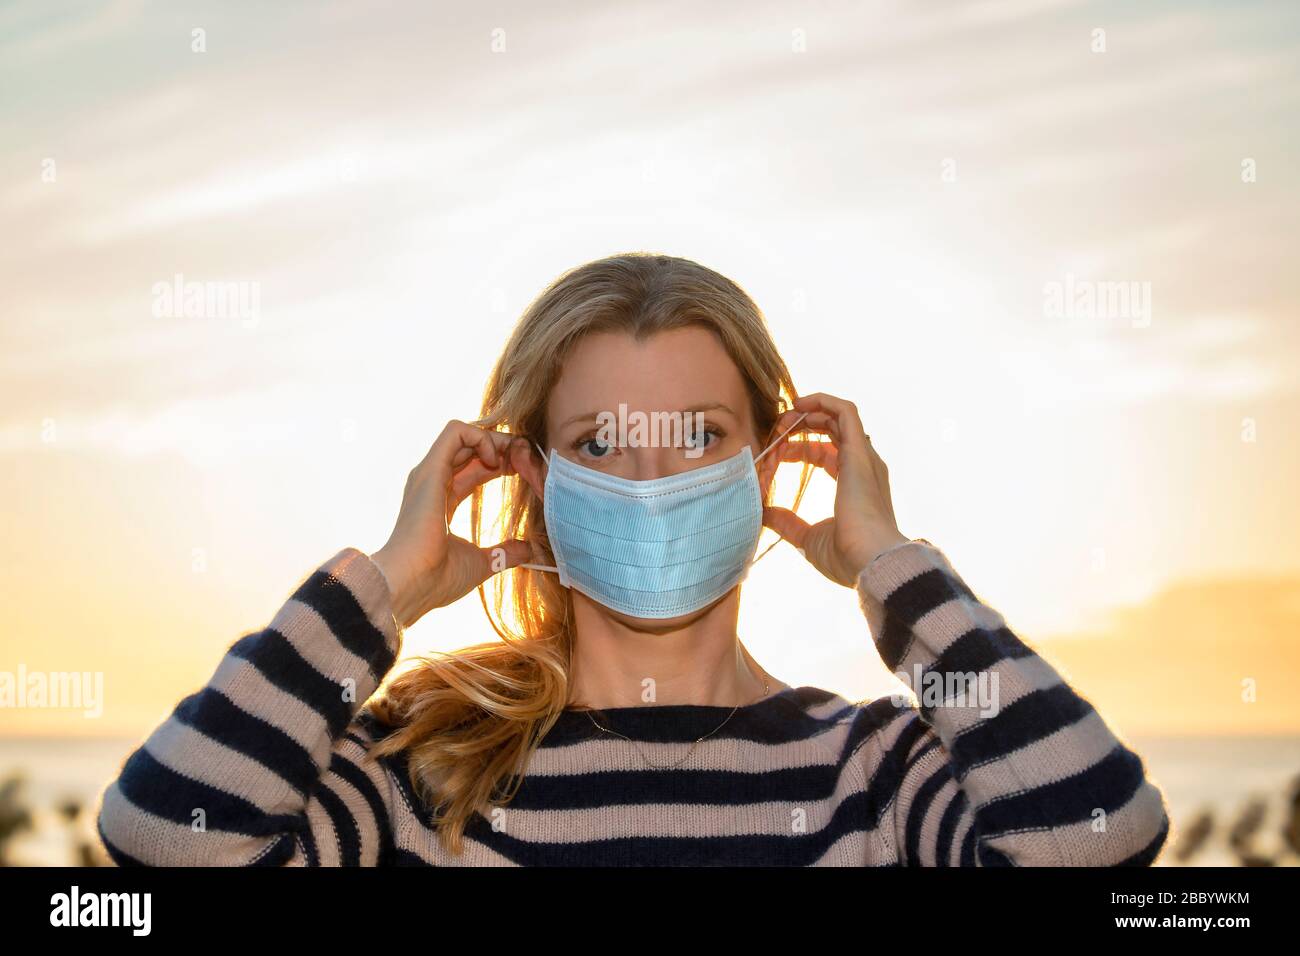 Woman putting on a protective face mask Stock Photo